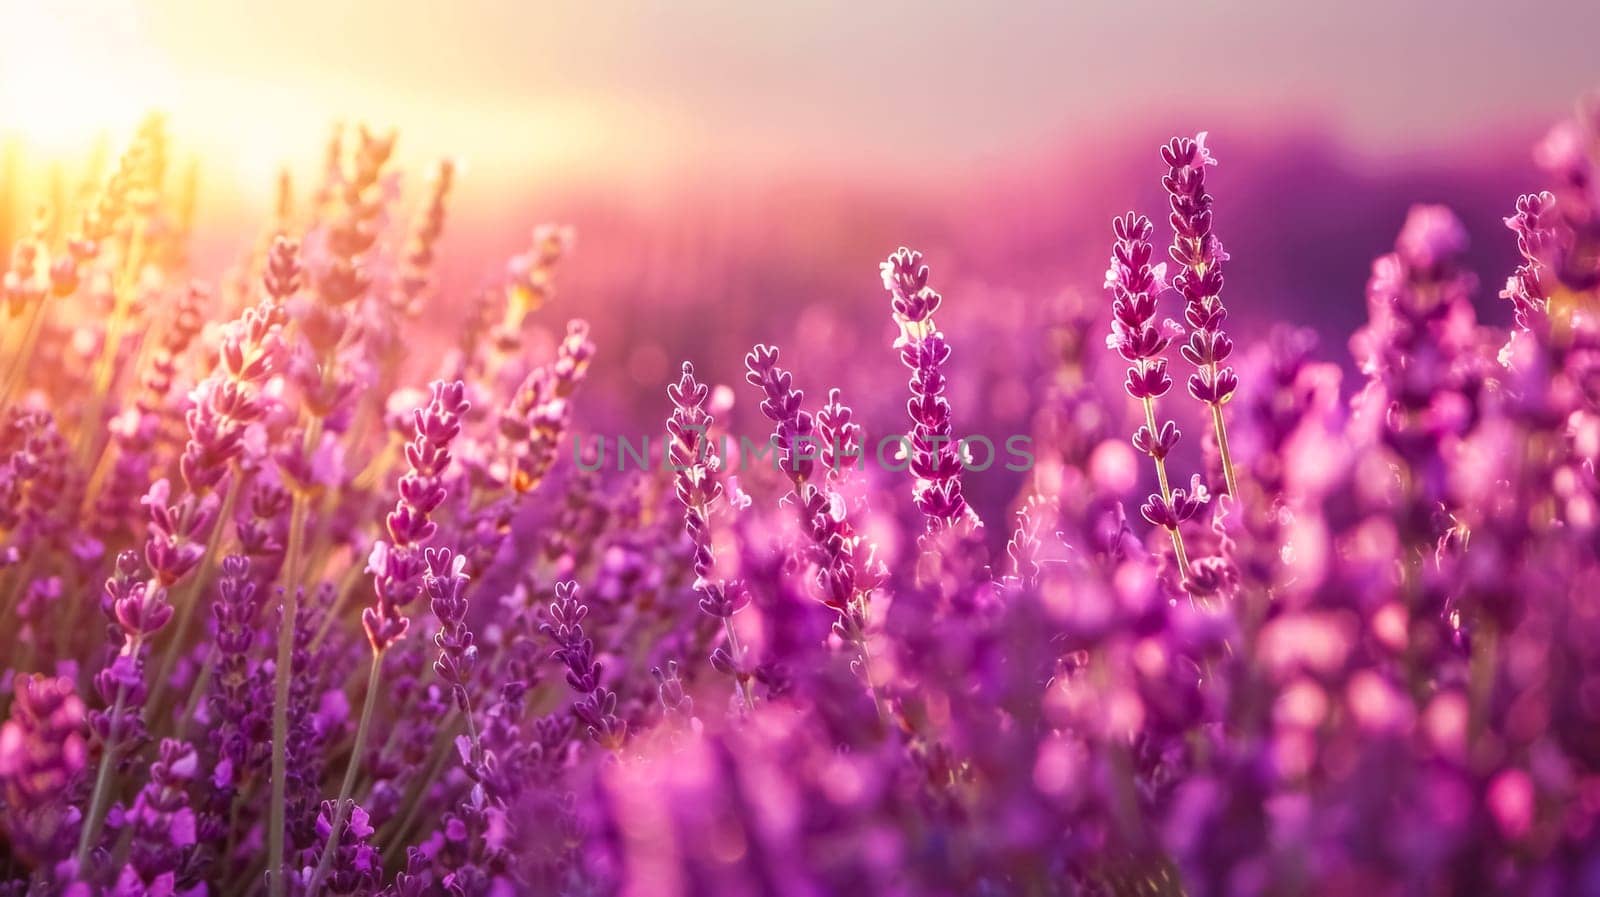 Golden sunset over a vibrant field of blooming lavender by Edophoto